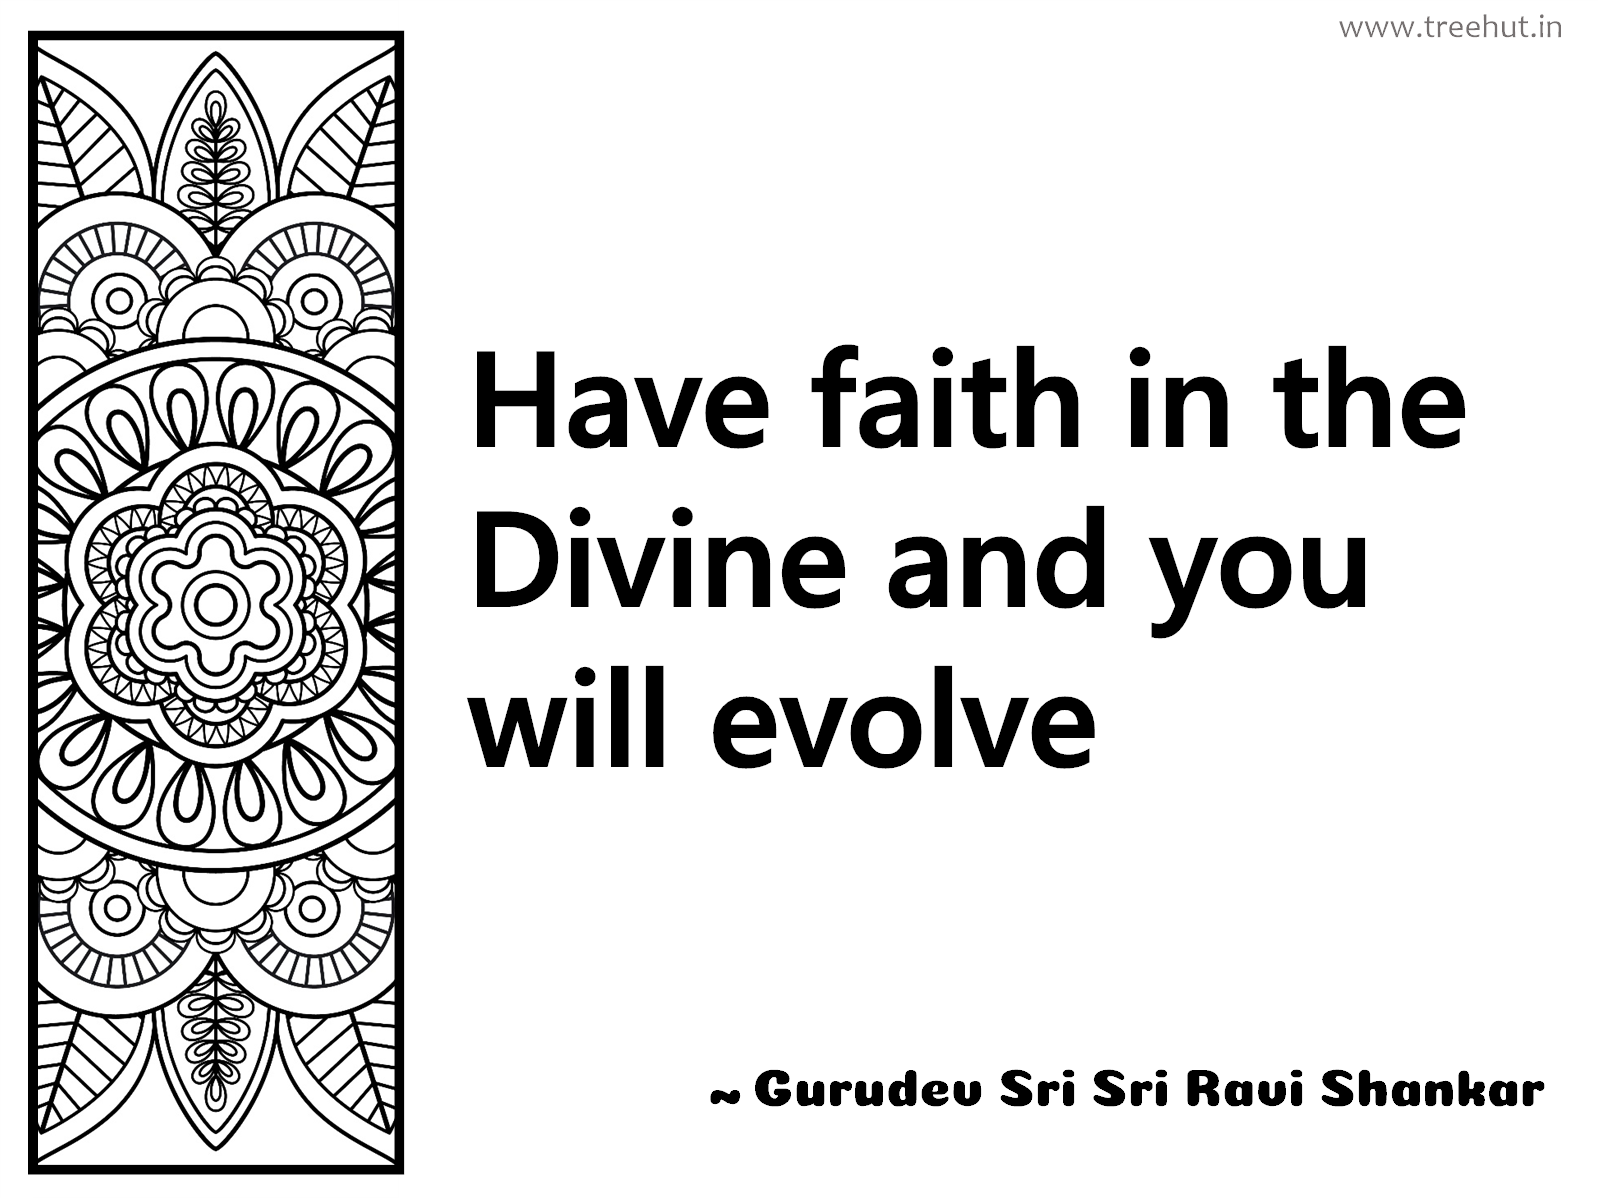 Have faith in the Divine and you will evolve Inspirational Quote by Gurudev Sri Sri Ravi Shankar, coloring pages